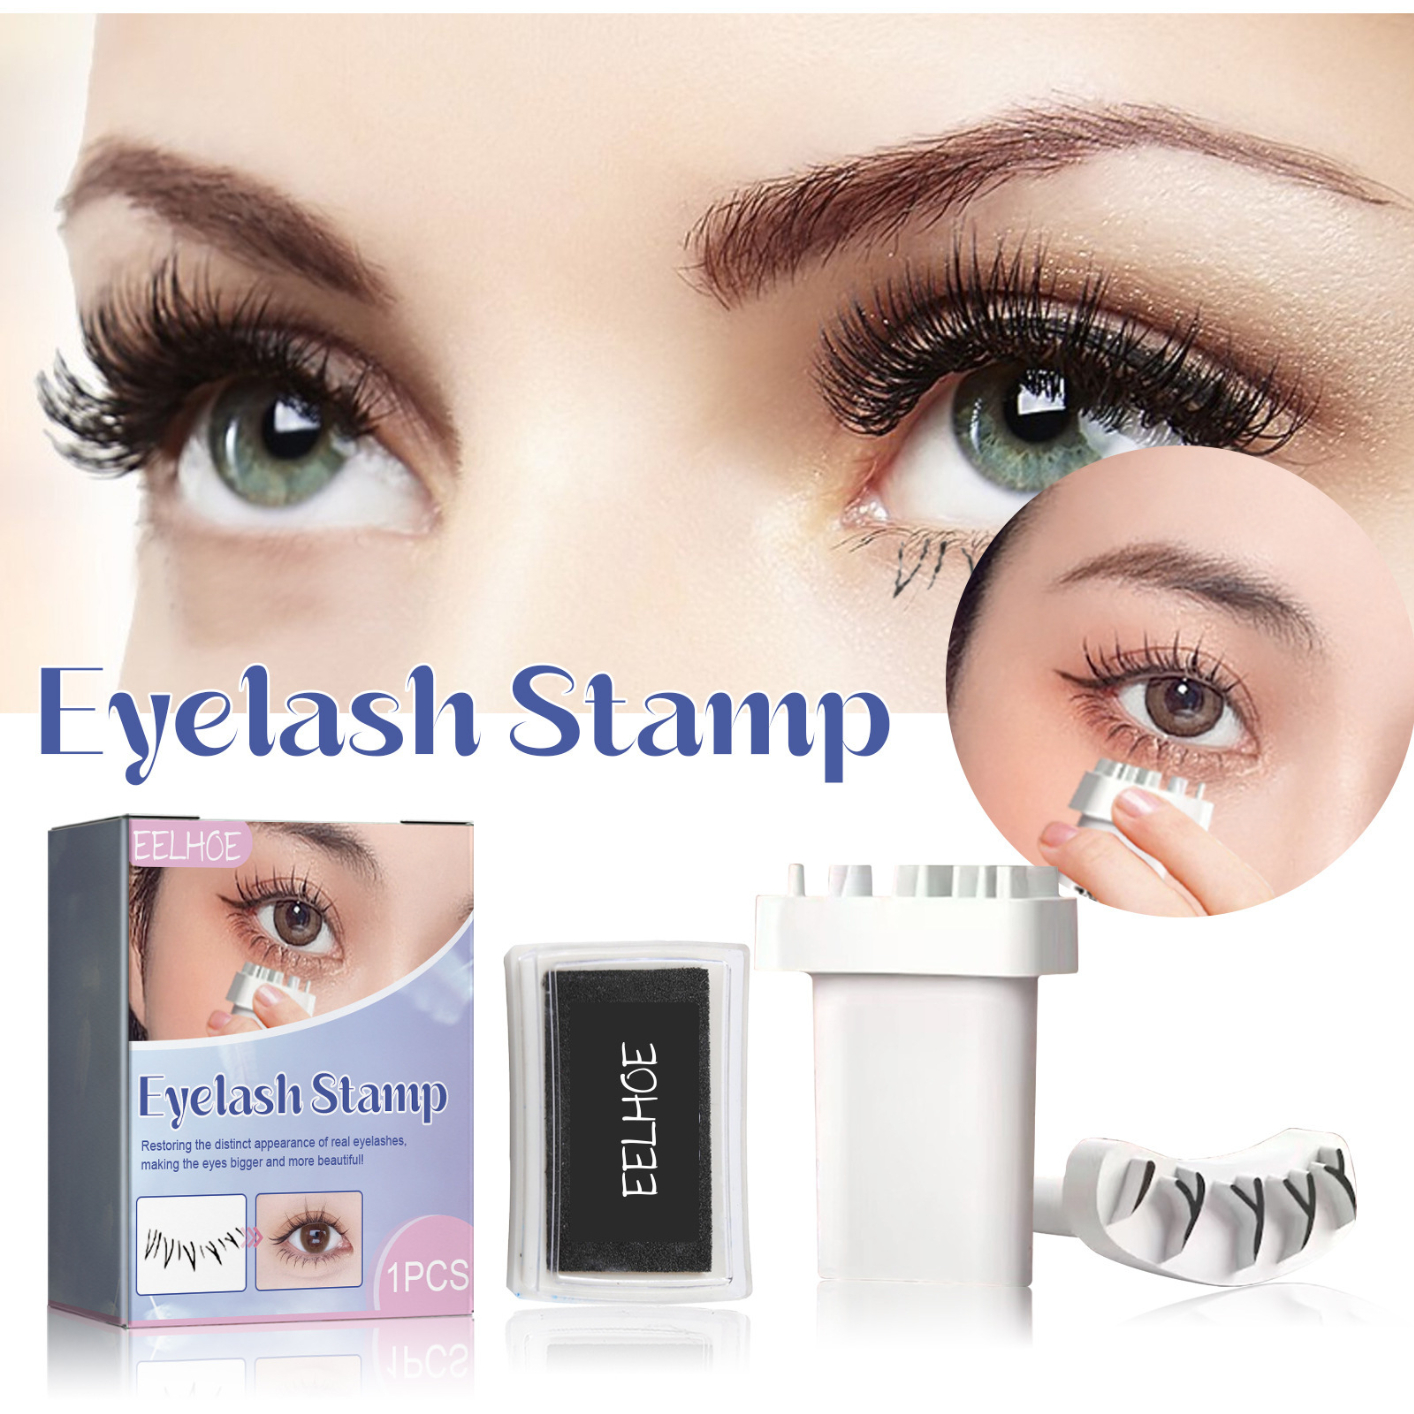 EELHOE Eyelash Stamps Tool - Lazy Eye Shadow Stamps, Eye Makeup Tool, DIY Lower Lashes Extensions Natural Look for Make Up Beginner